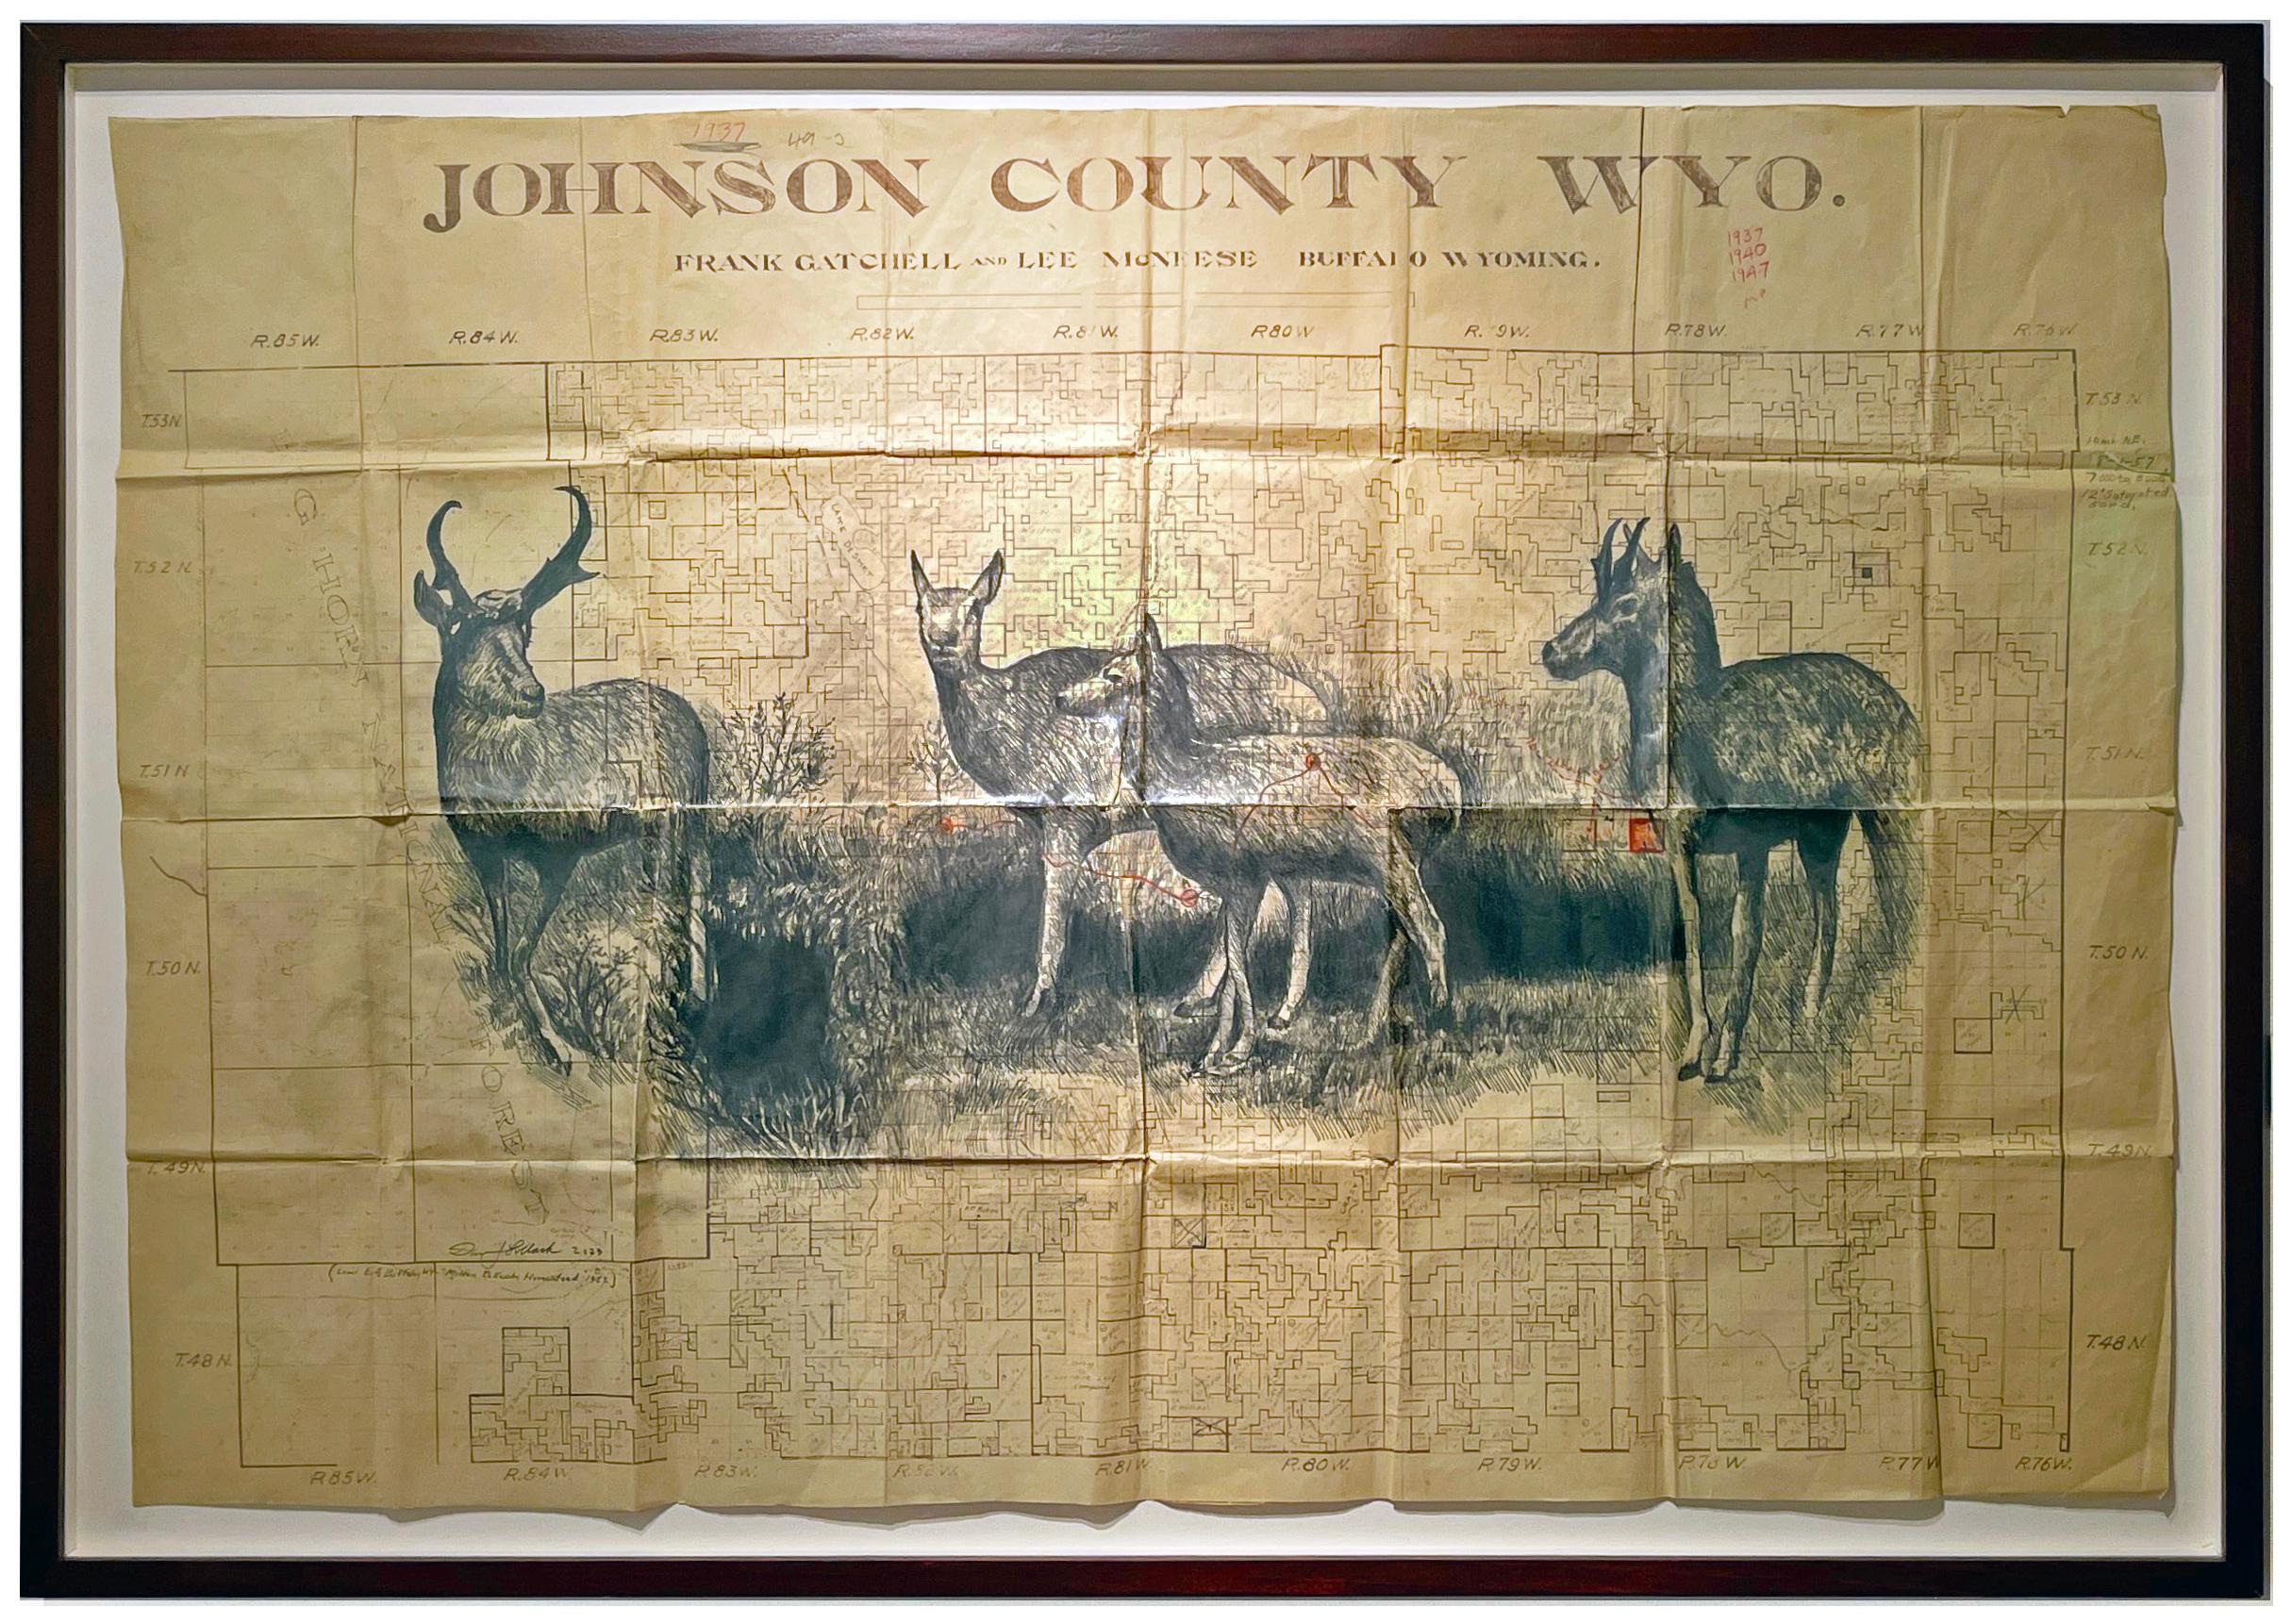 High Plaines Homestead - Deer in Graphite on Antique Map Drawings 